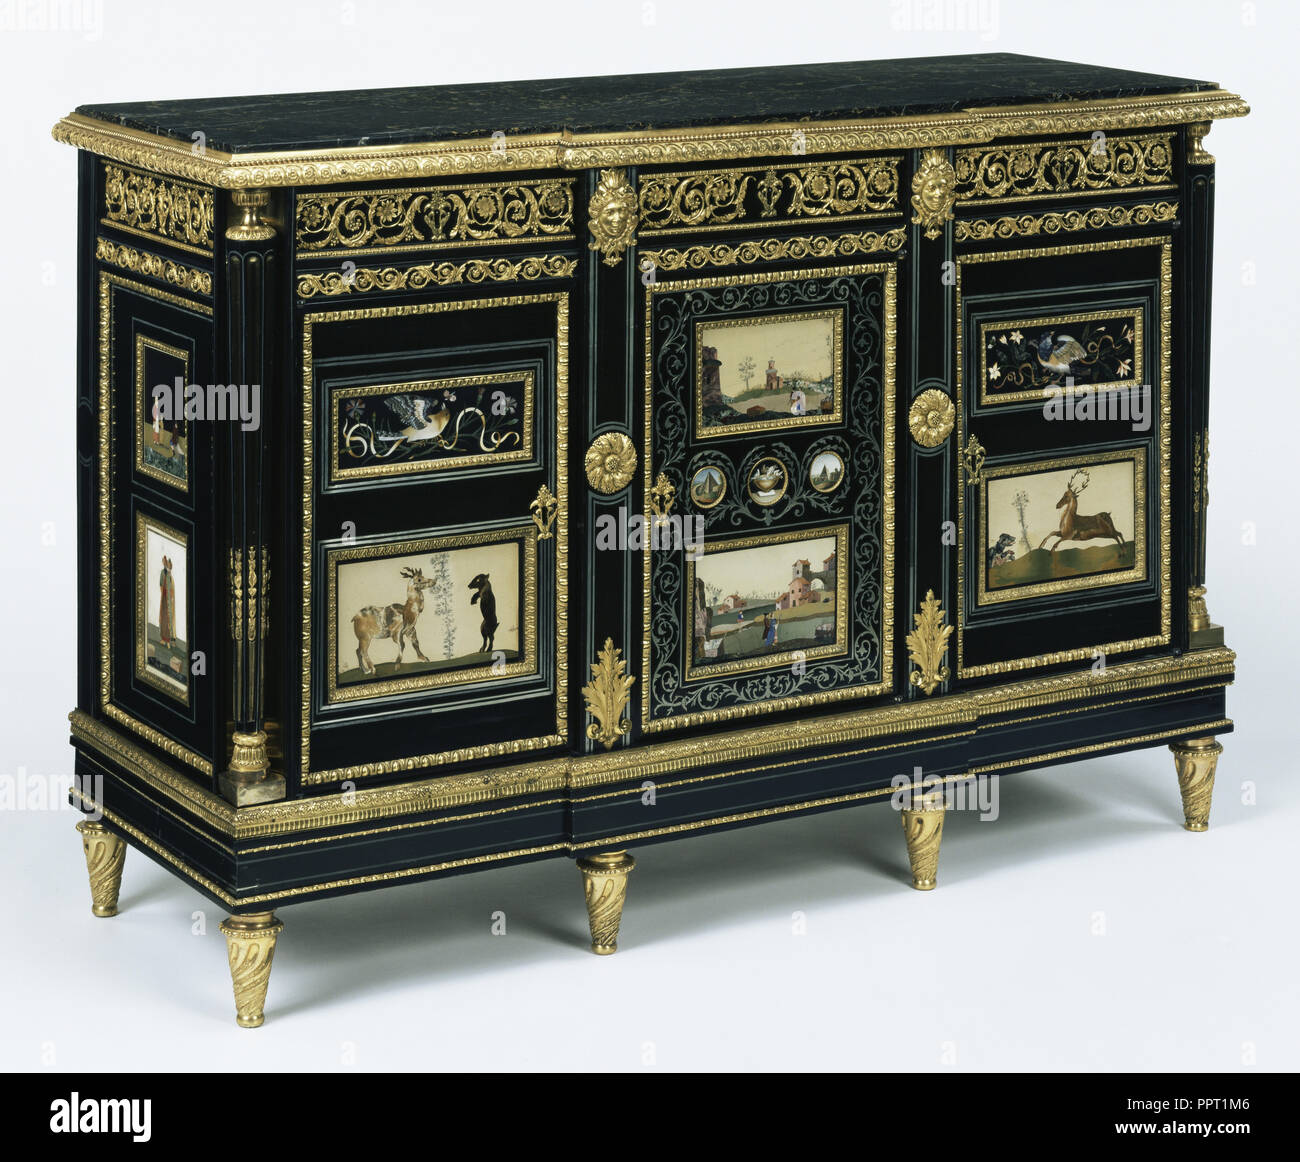 One of a Pair of Cabinets; Attributed to Adam Weisweiler, French, 1744 - 1820, master 1778), Paris, France; about 1785; pietra Stock Photo